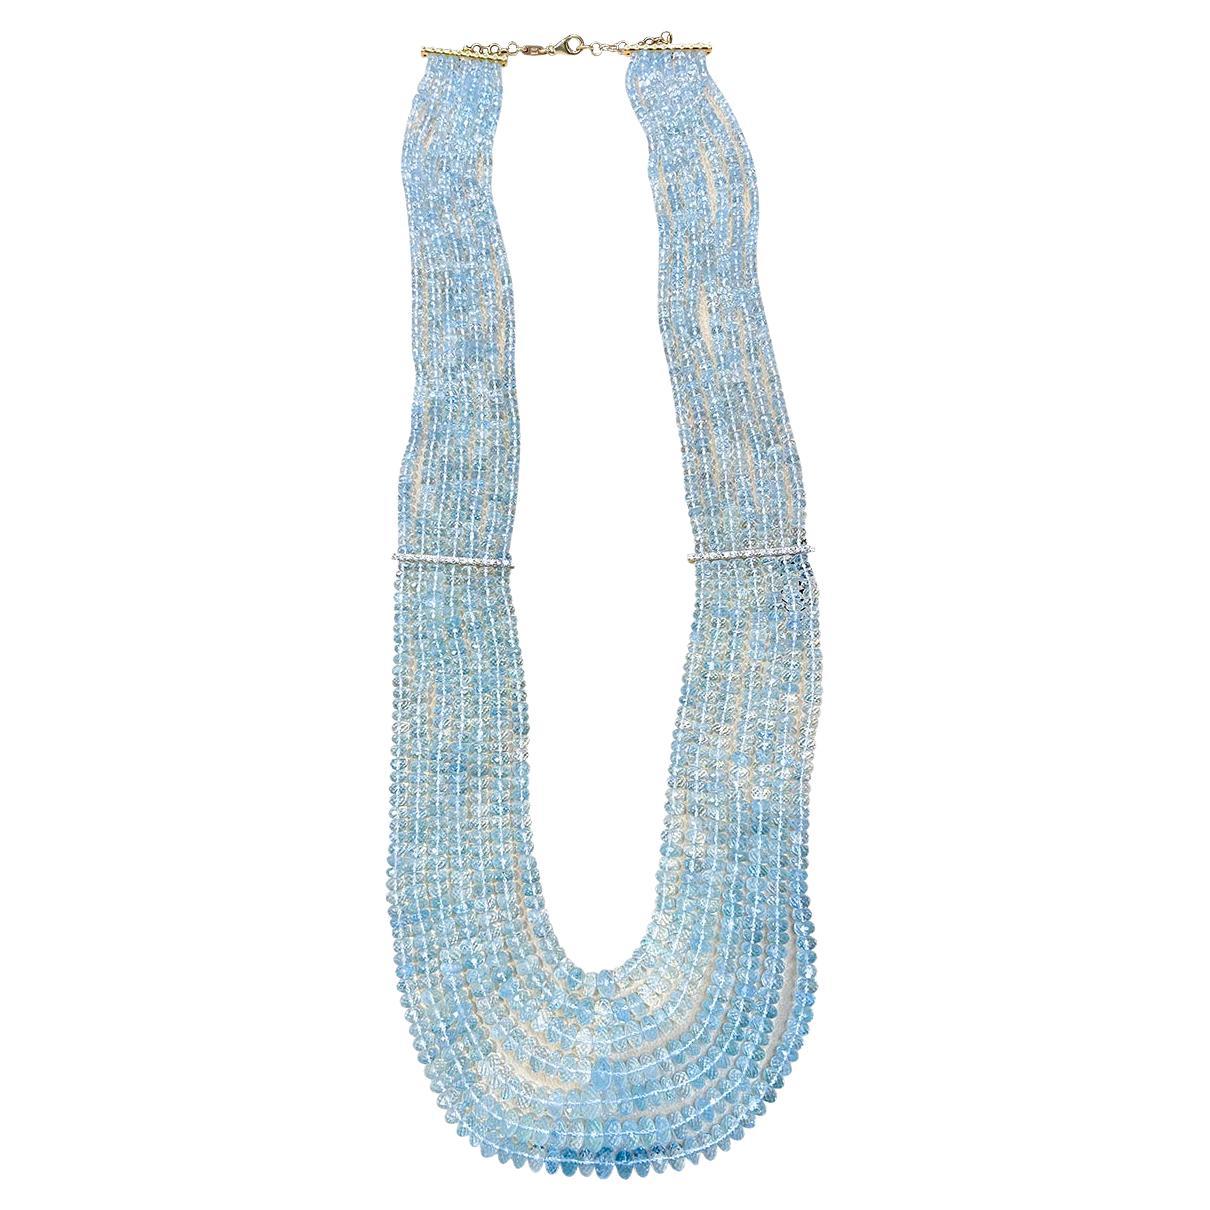 1100 Ct 6 Layer Natural Aquamarine Bead Necklace 14 Kt Gold and Diamond Necklace